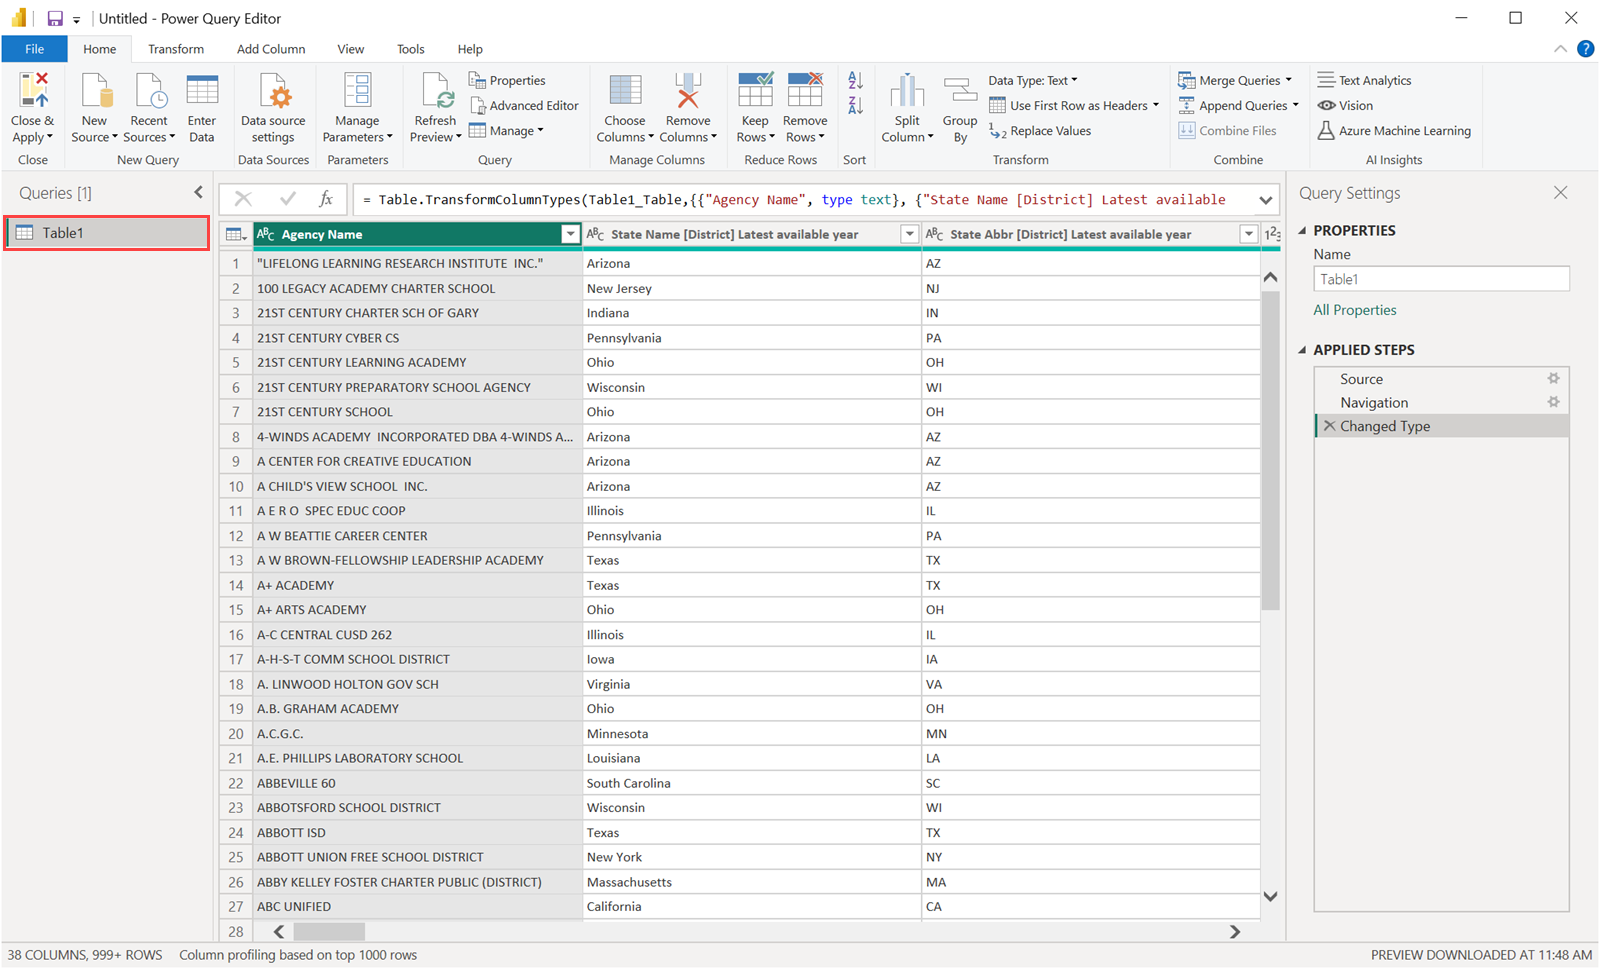 Screenshot of the Power Query Editor with Table 1 highlighted in the queries pane.